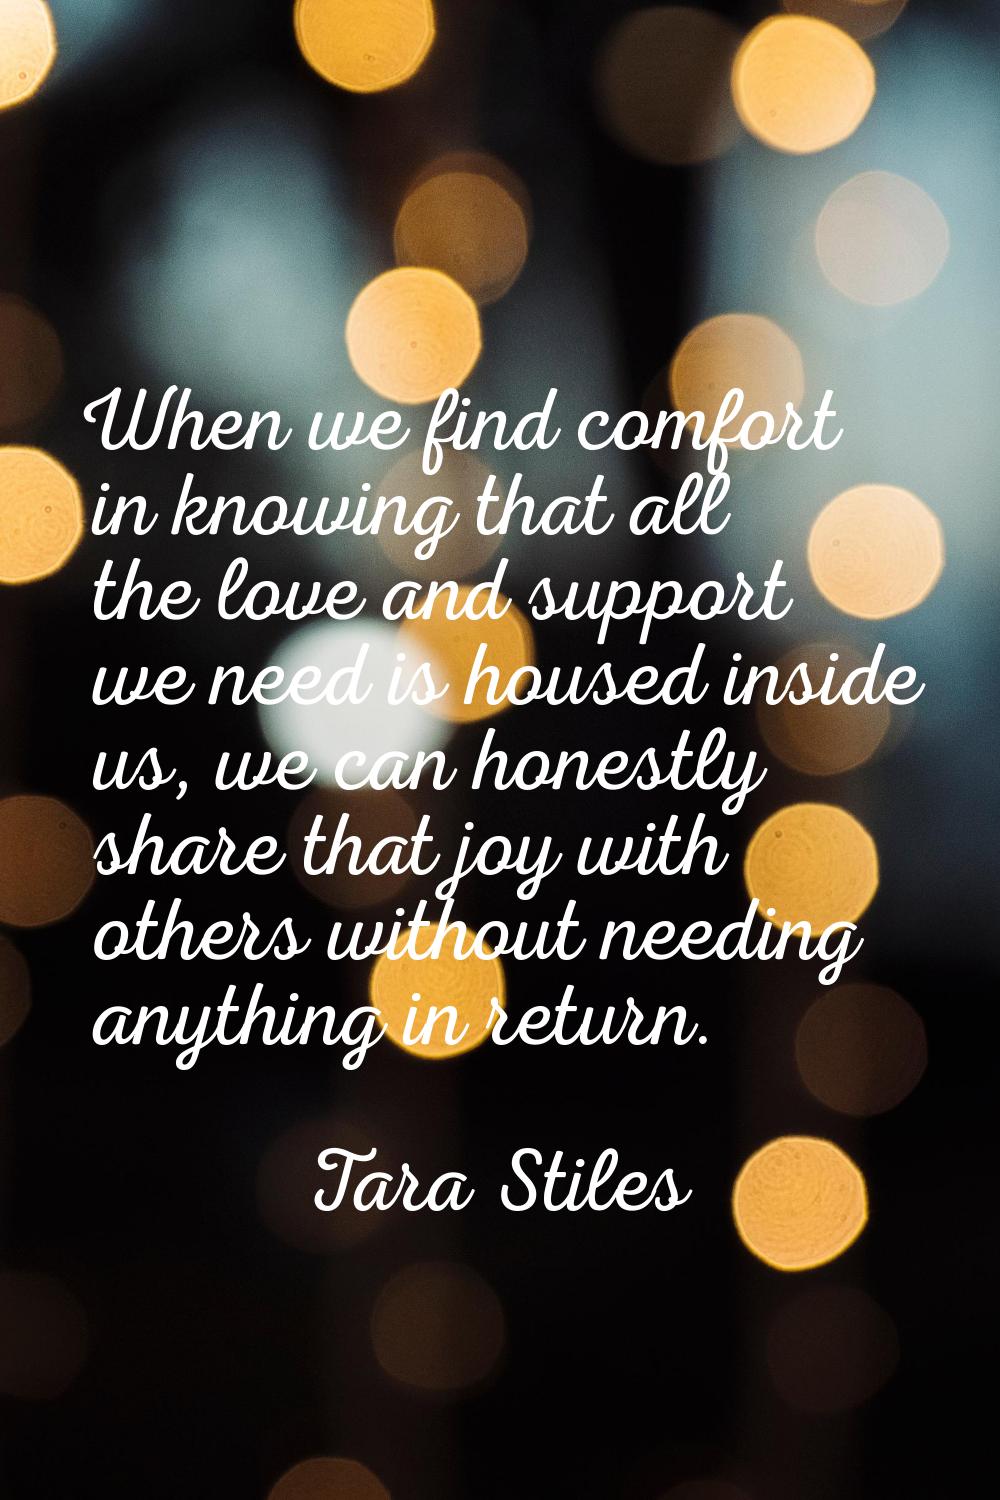 When we find comfort in knowing that all the love and support we need is housed inside us, we can h